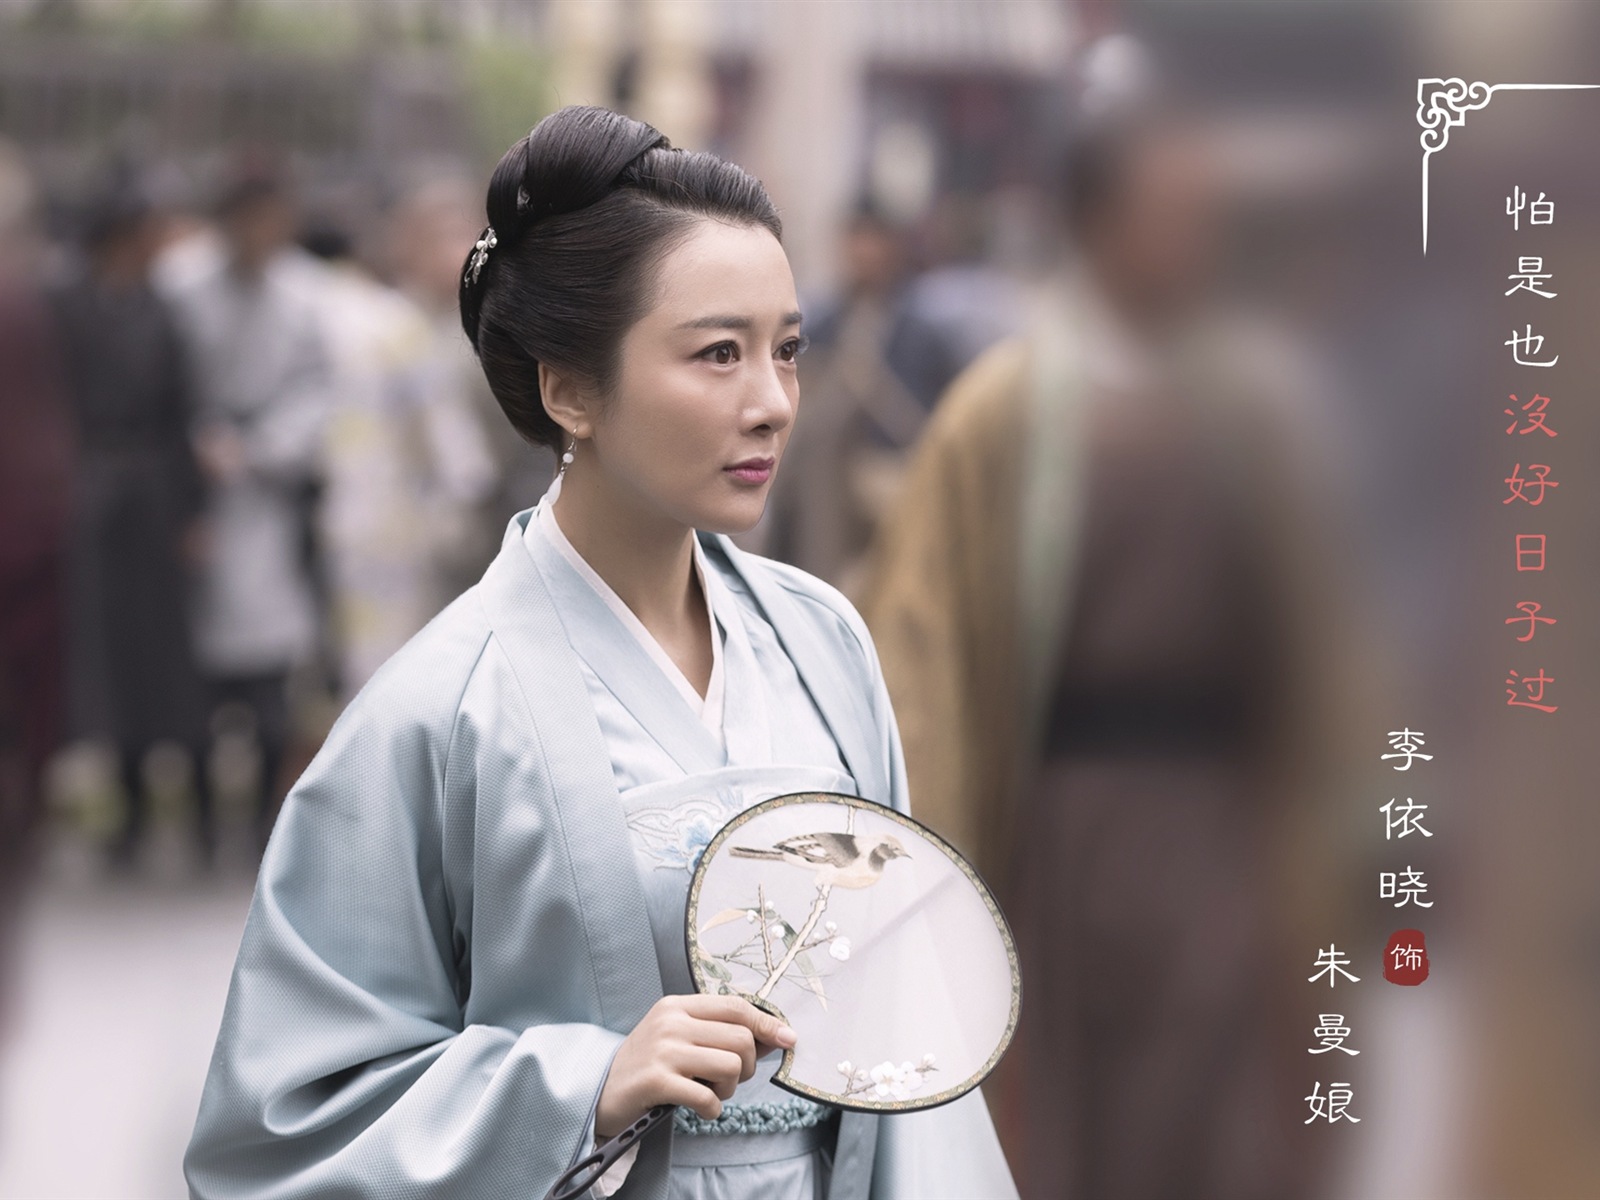 The Story Of MingLan, TV series HD wallpapers #34 - 1600x1200